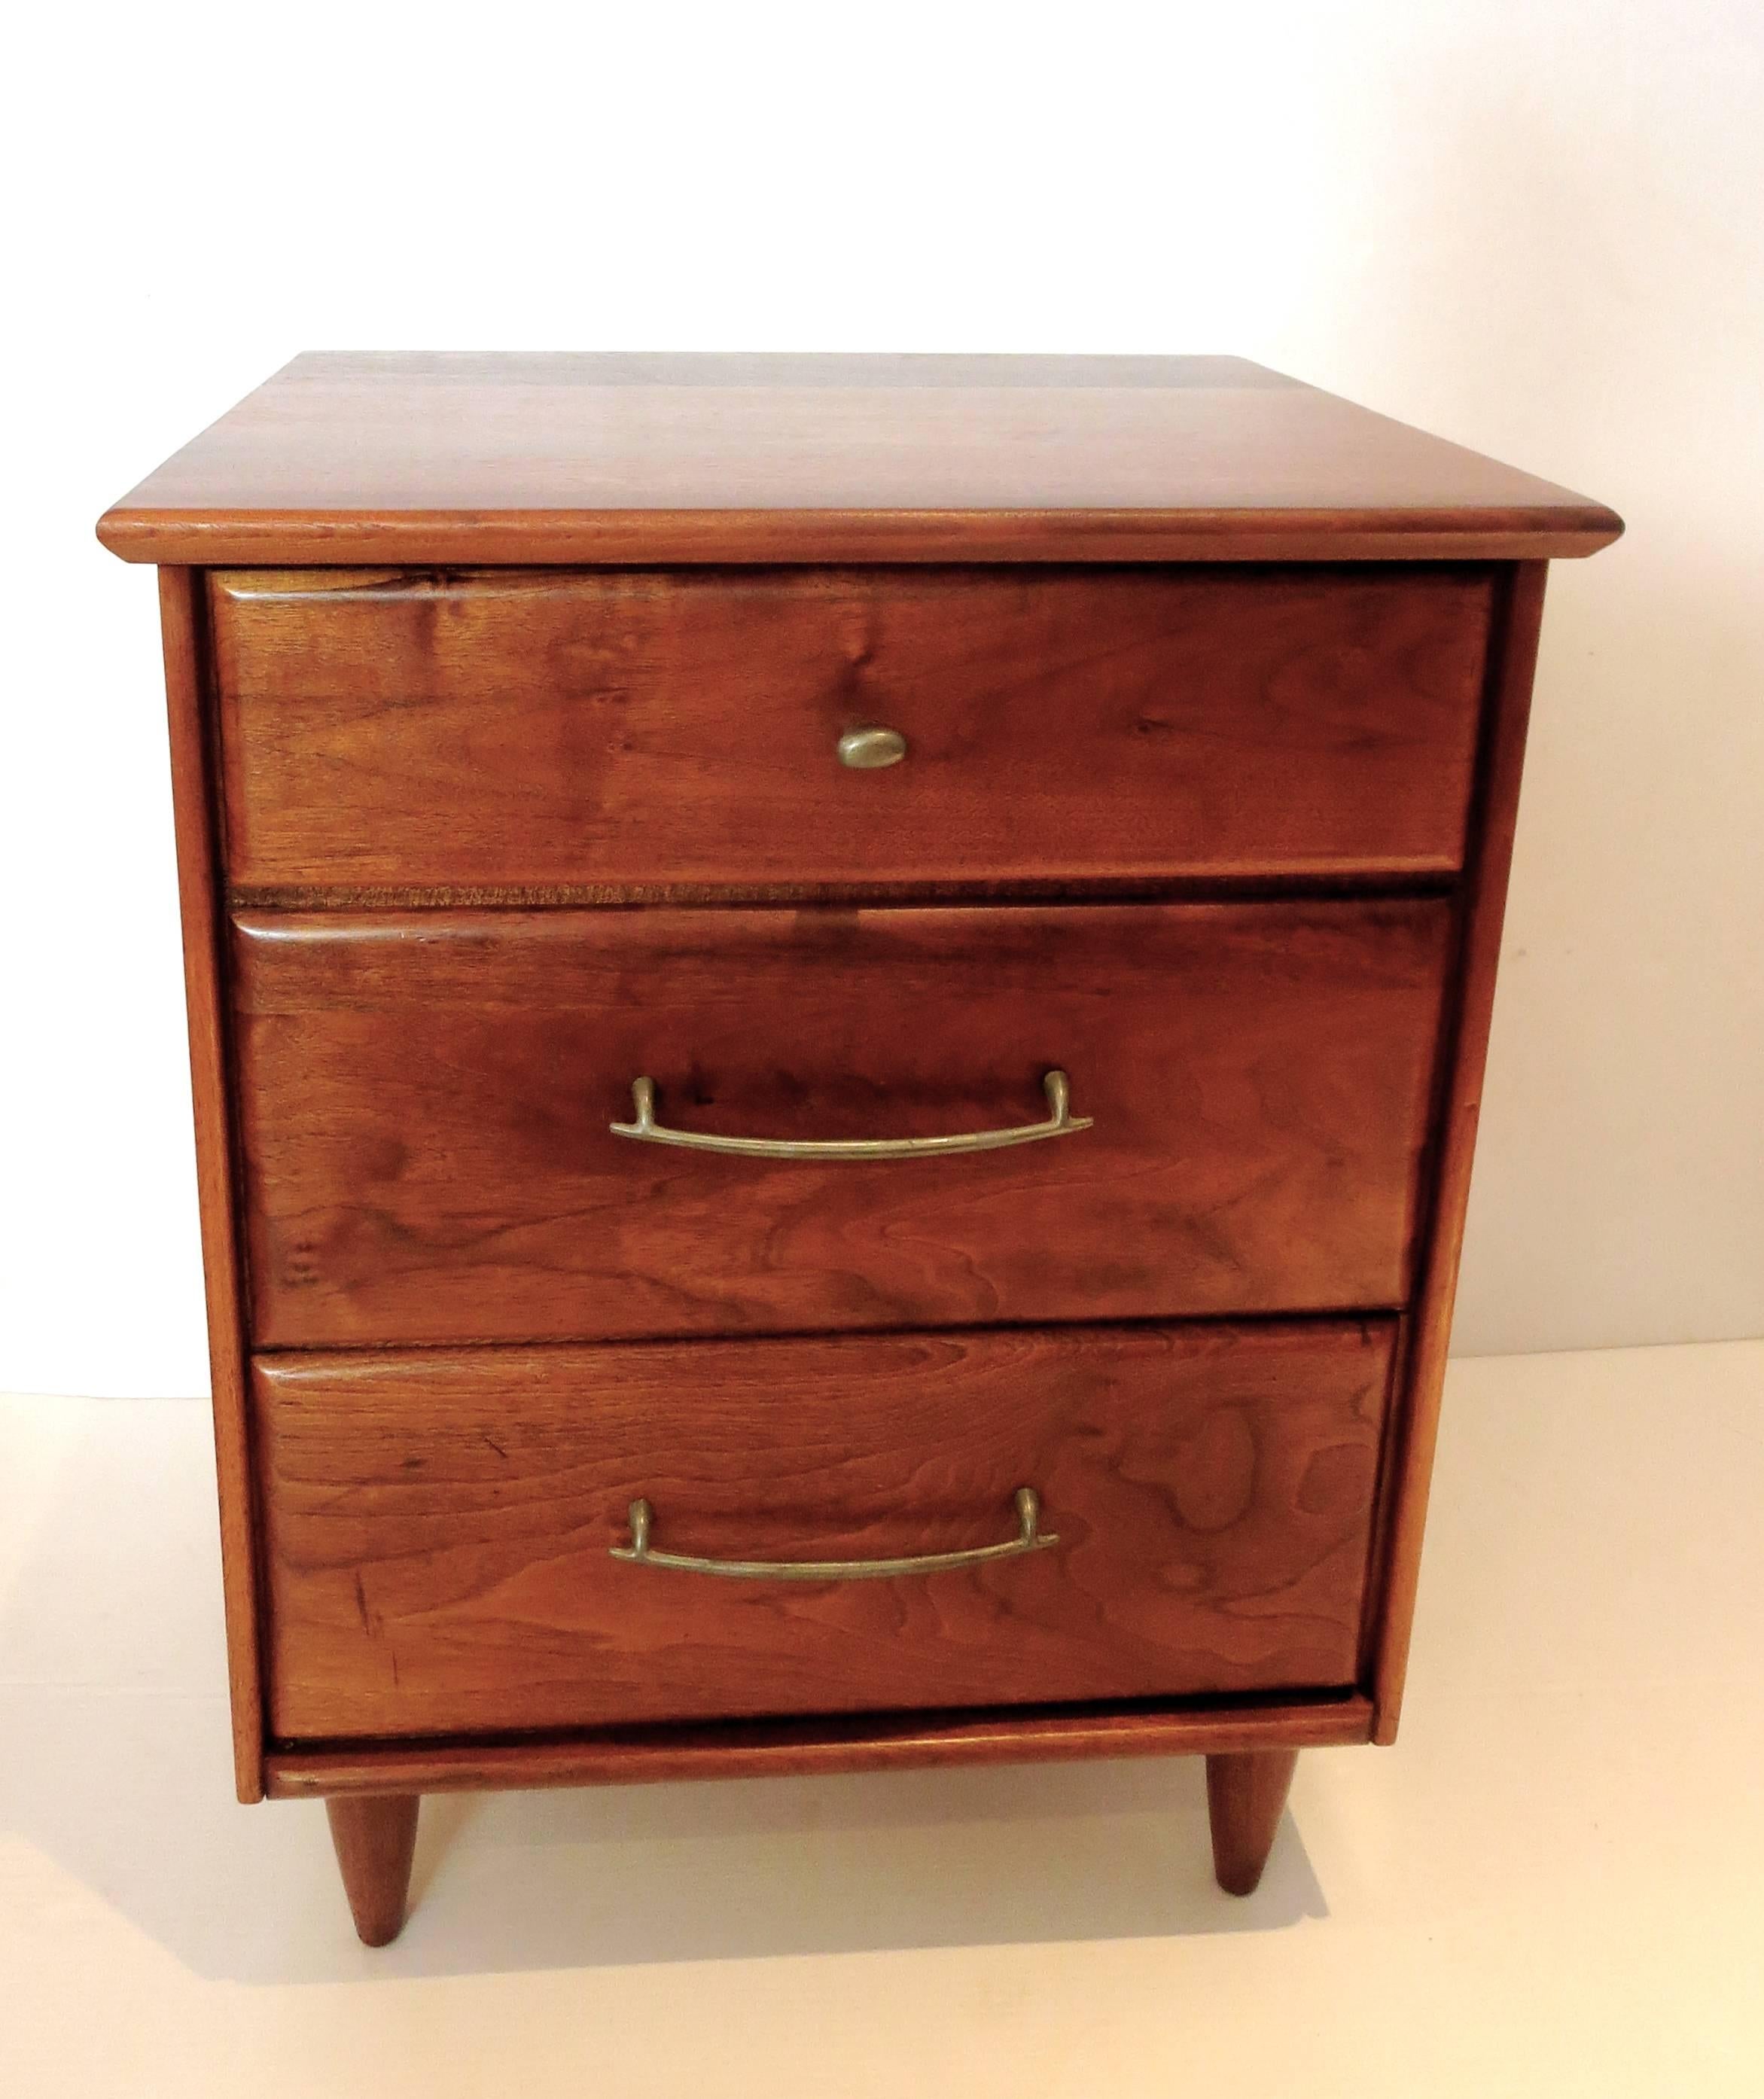 Beautiful design, nice grain on these matching set of two solid walnut nightstands, with solid aluminum handles, freshly refinished nice condition, simple and elegant manufactured by ACE-HI of California, the Prelude line, circa 1960s.